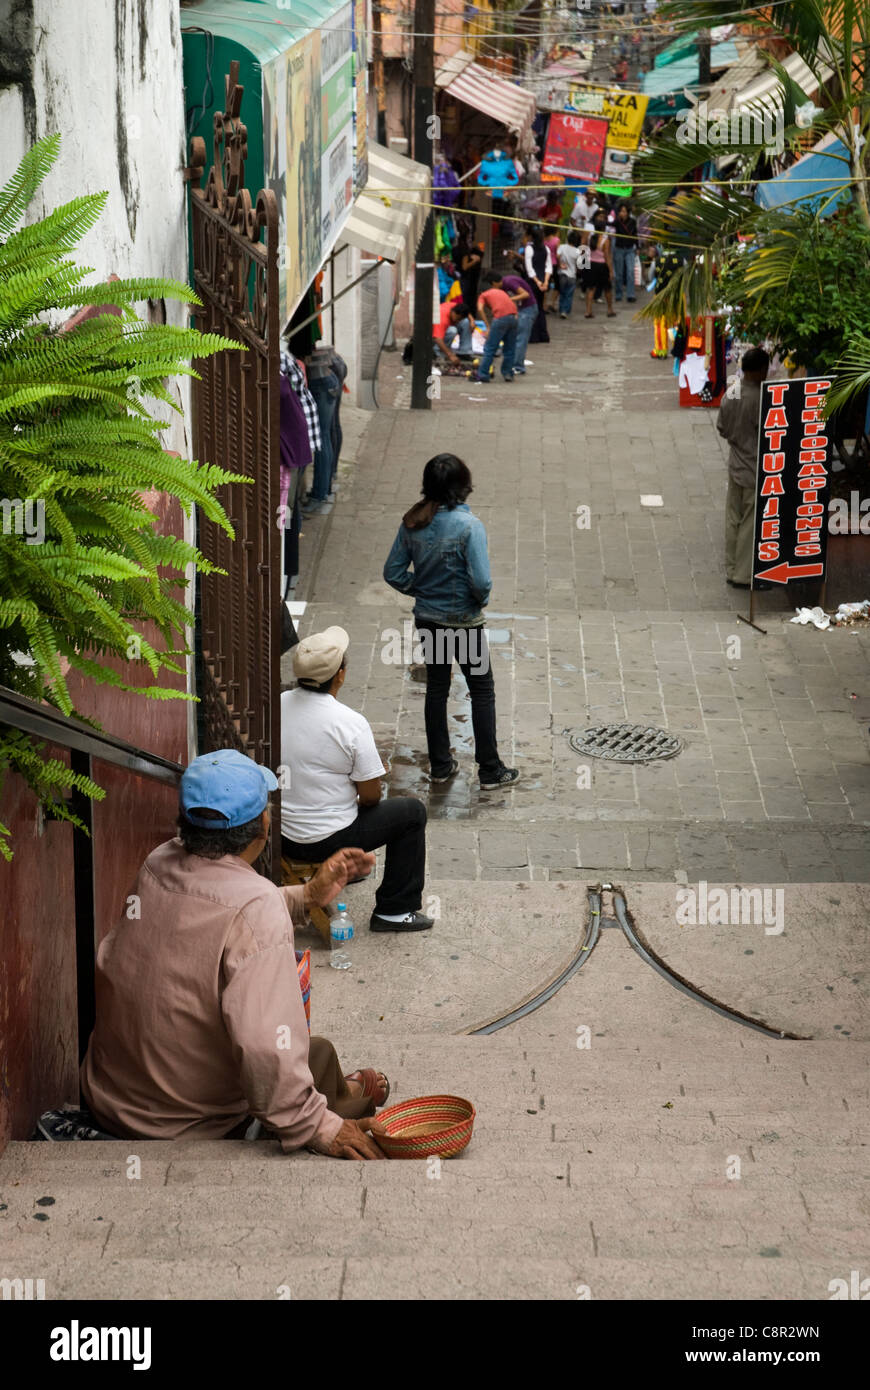 3 people looking down a street in Mexico. Stock Photo